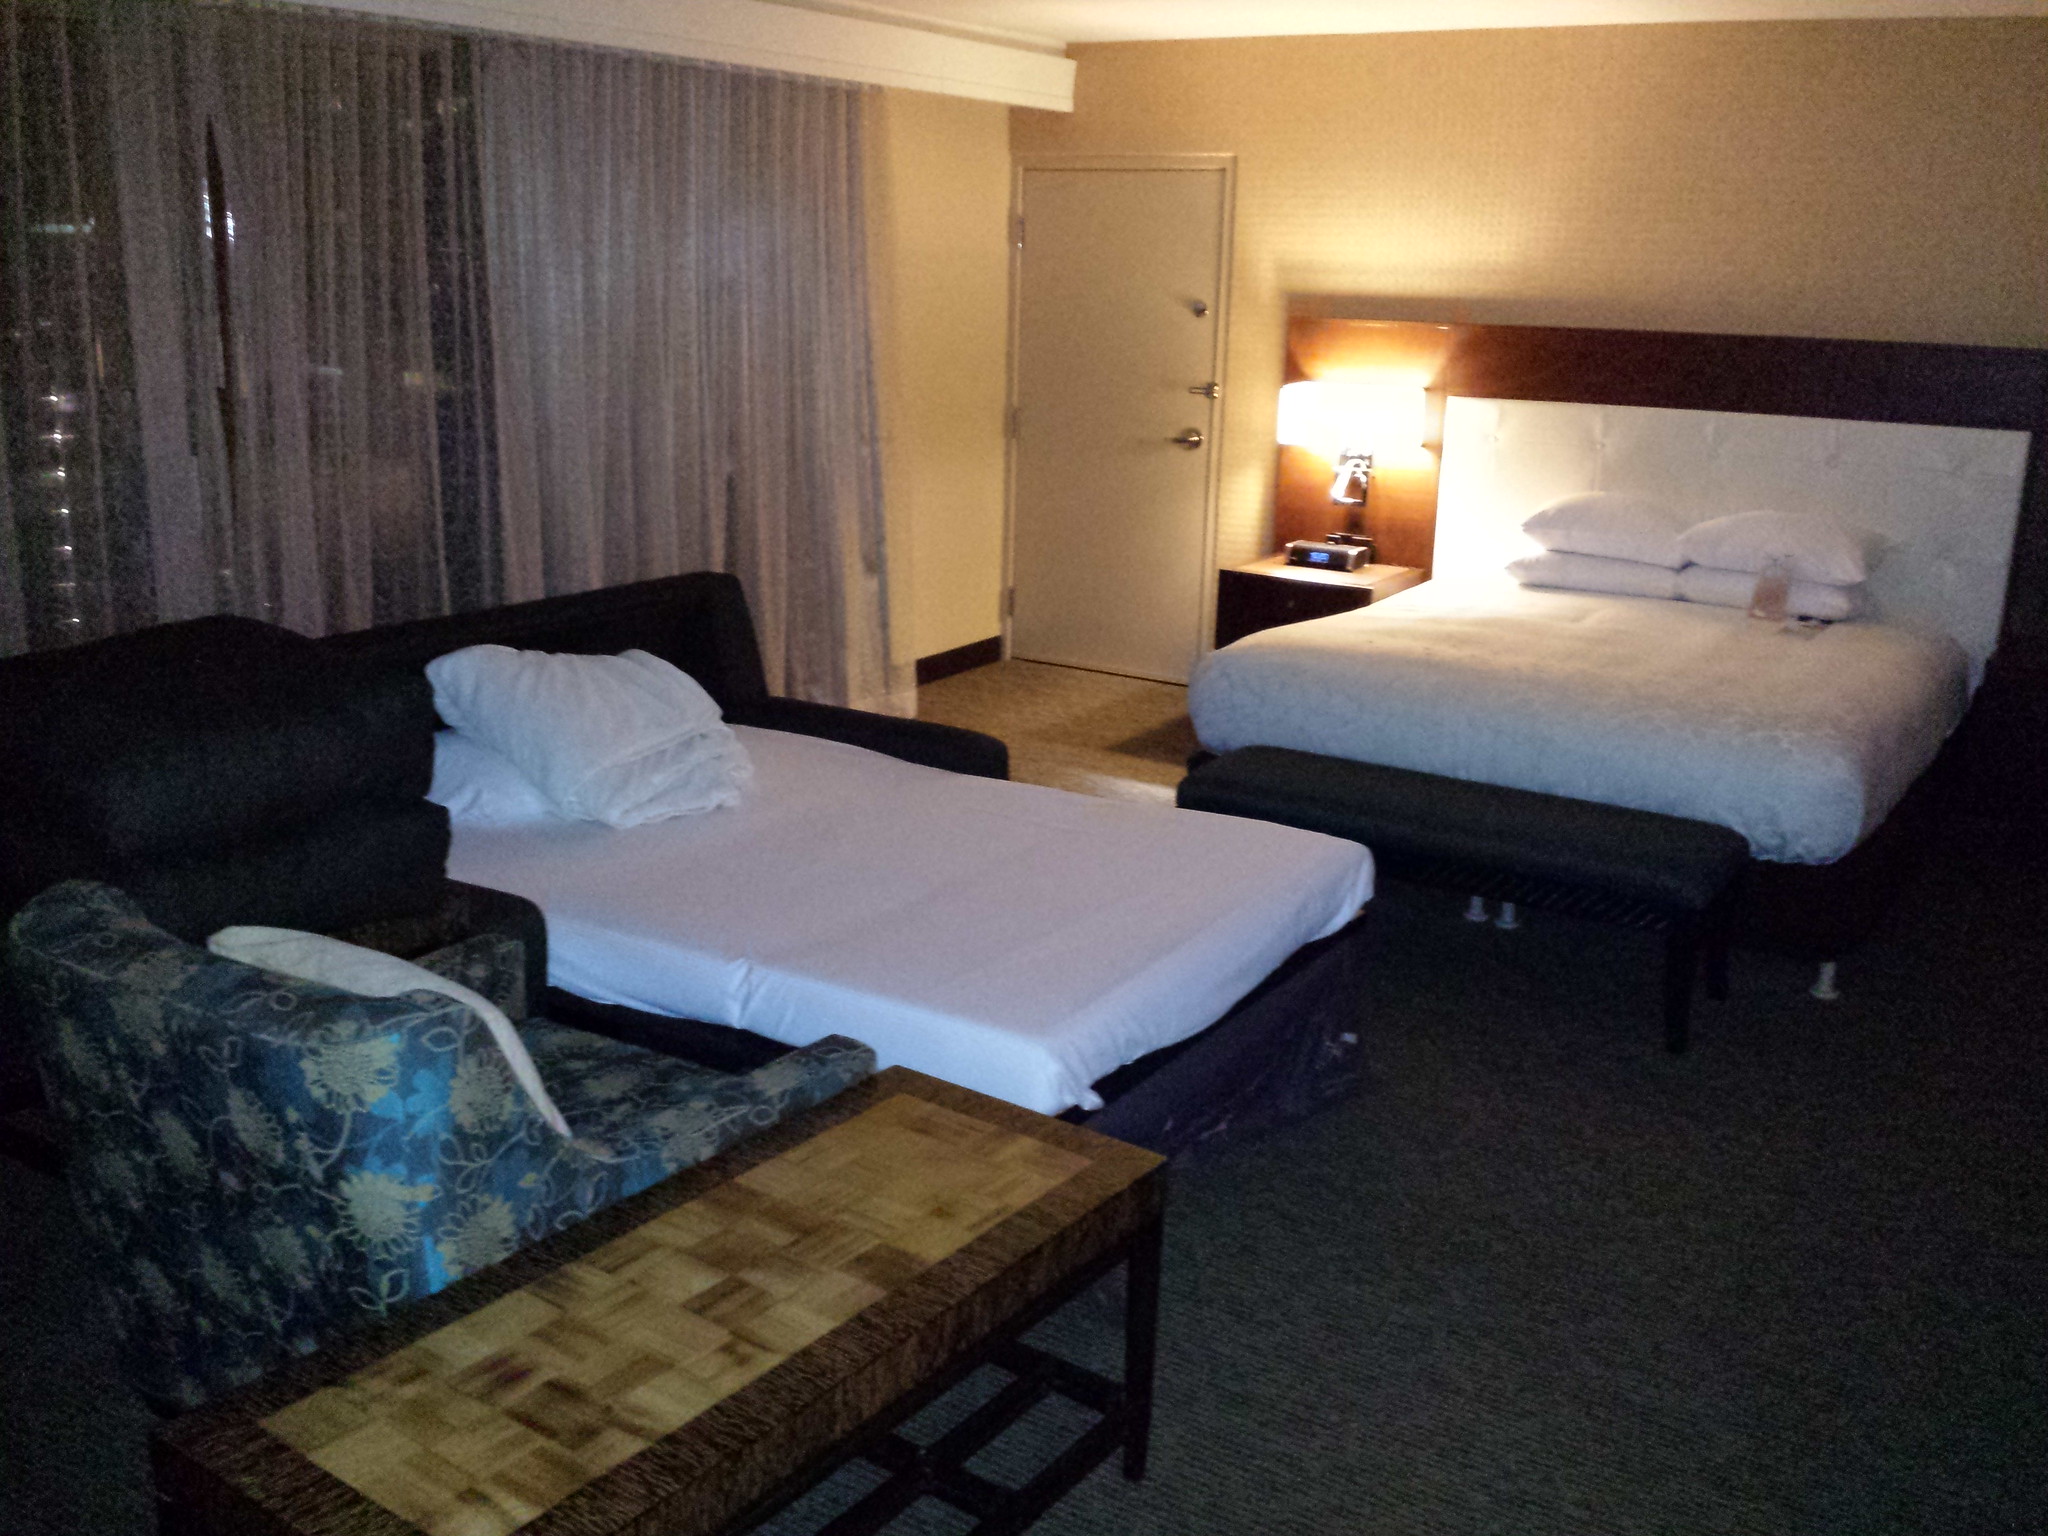 My suite at the Alana Doubletree in Honolulu